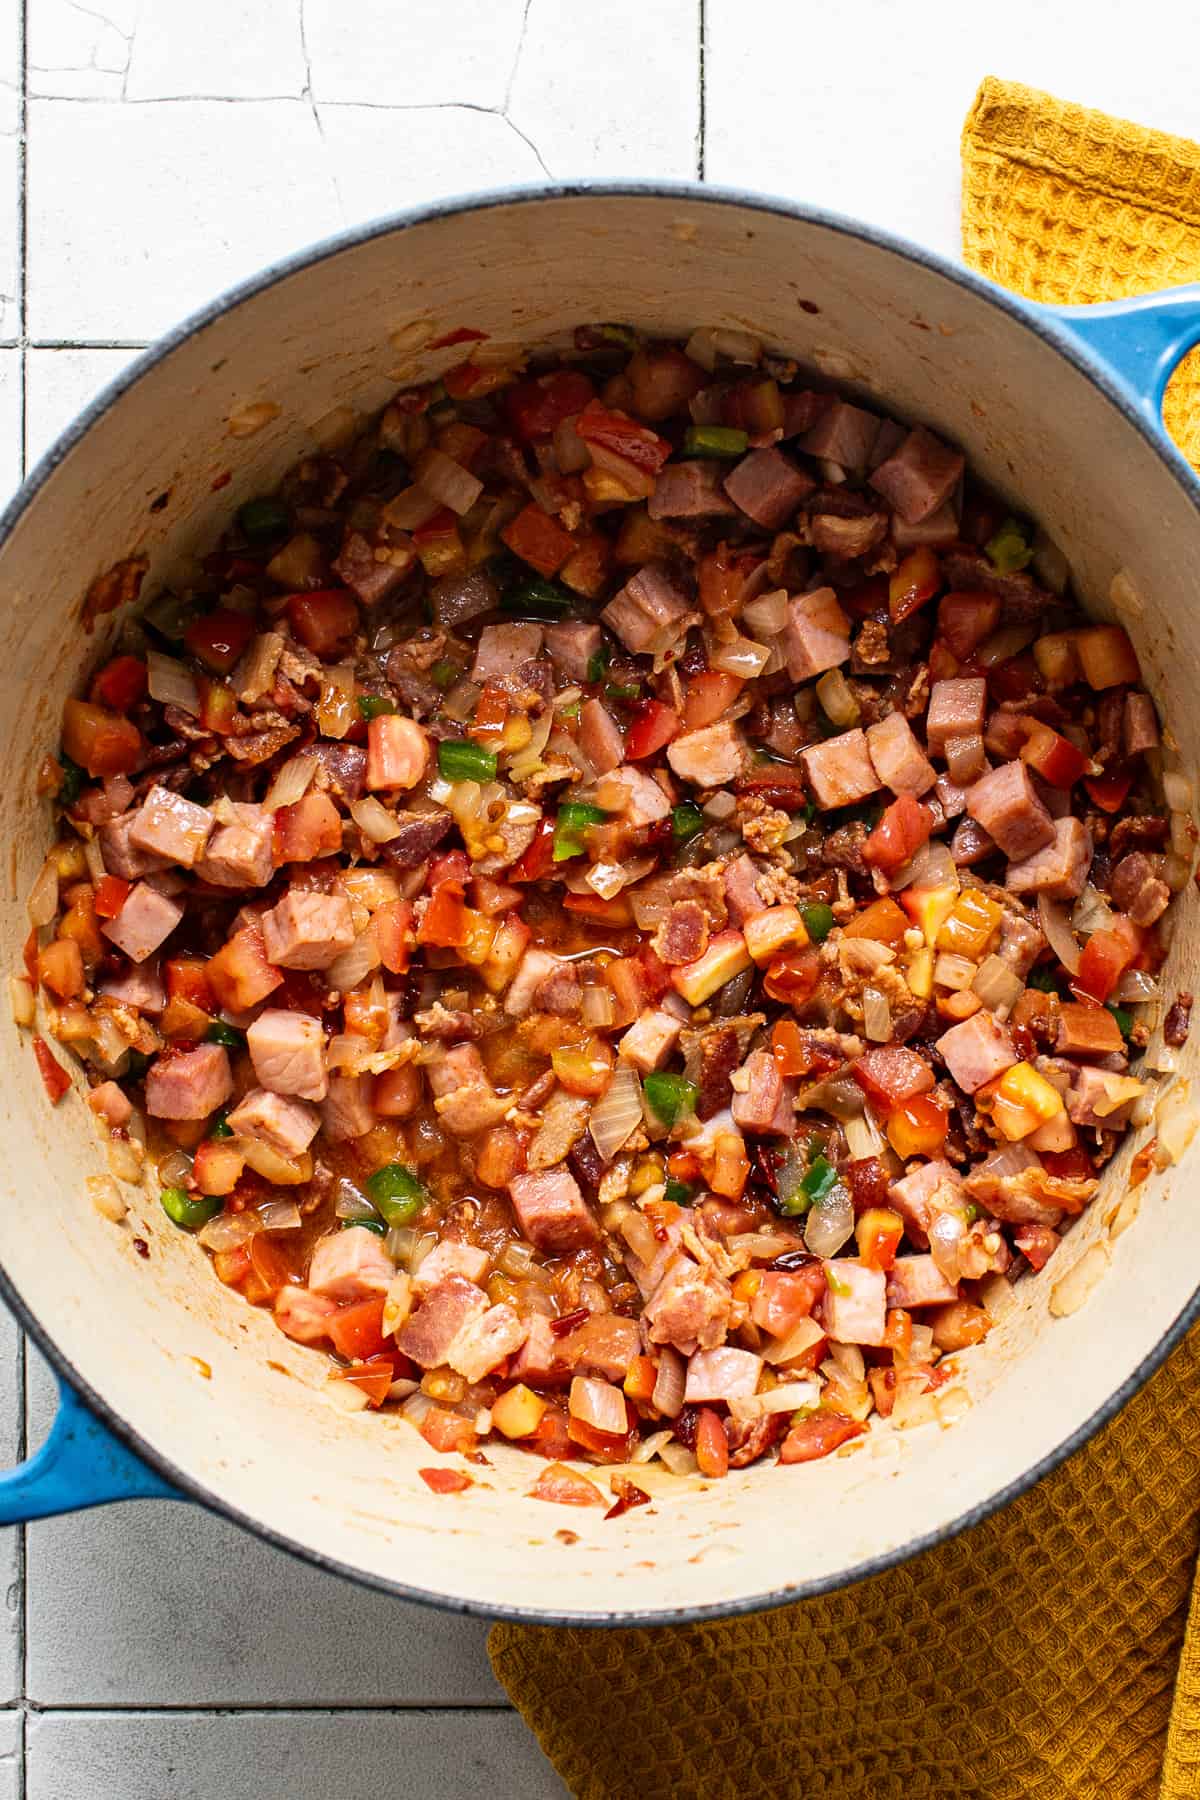 Bacon, ham, tomatoes, jalapeño, and more cooking in a pot to make charro beans.